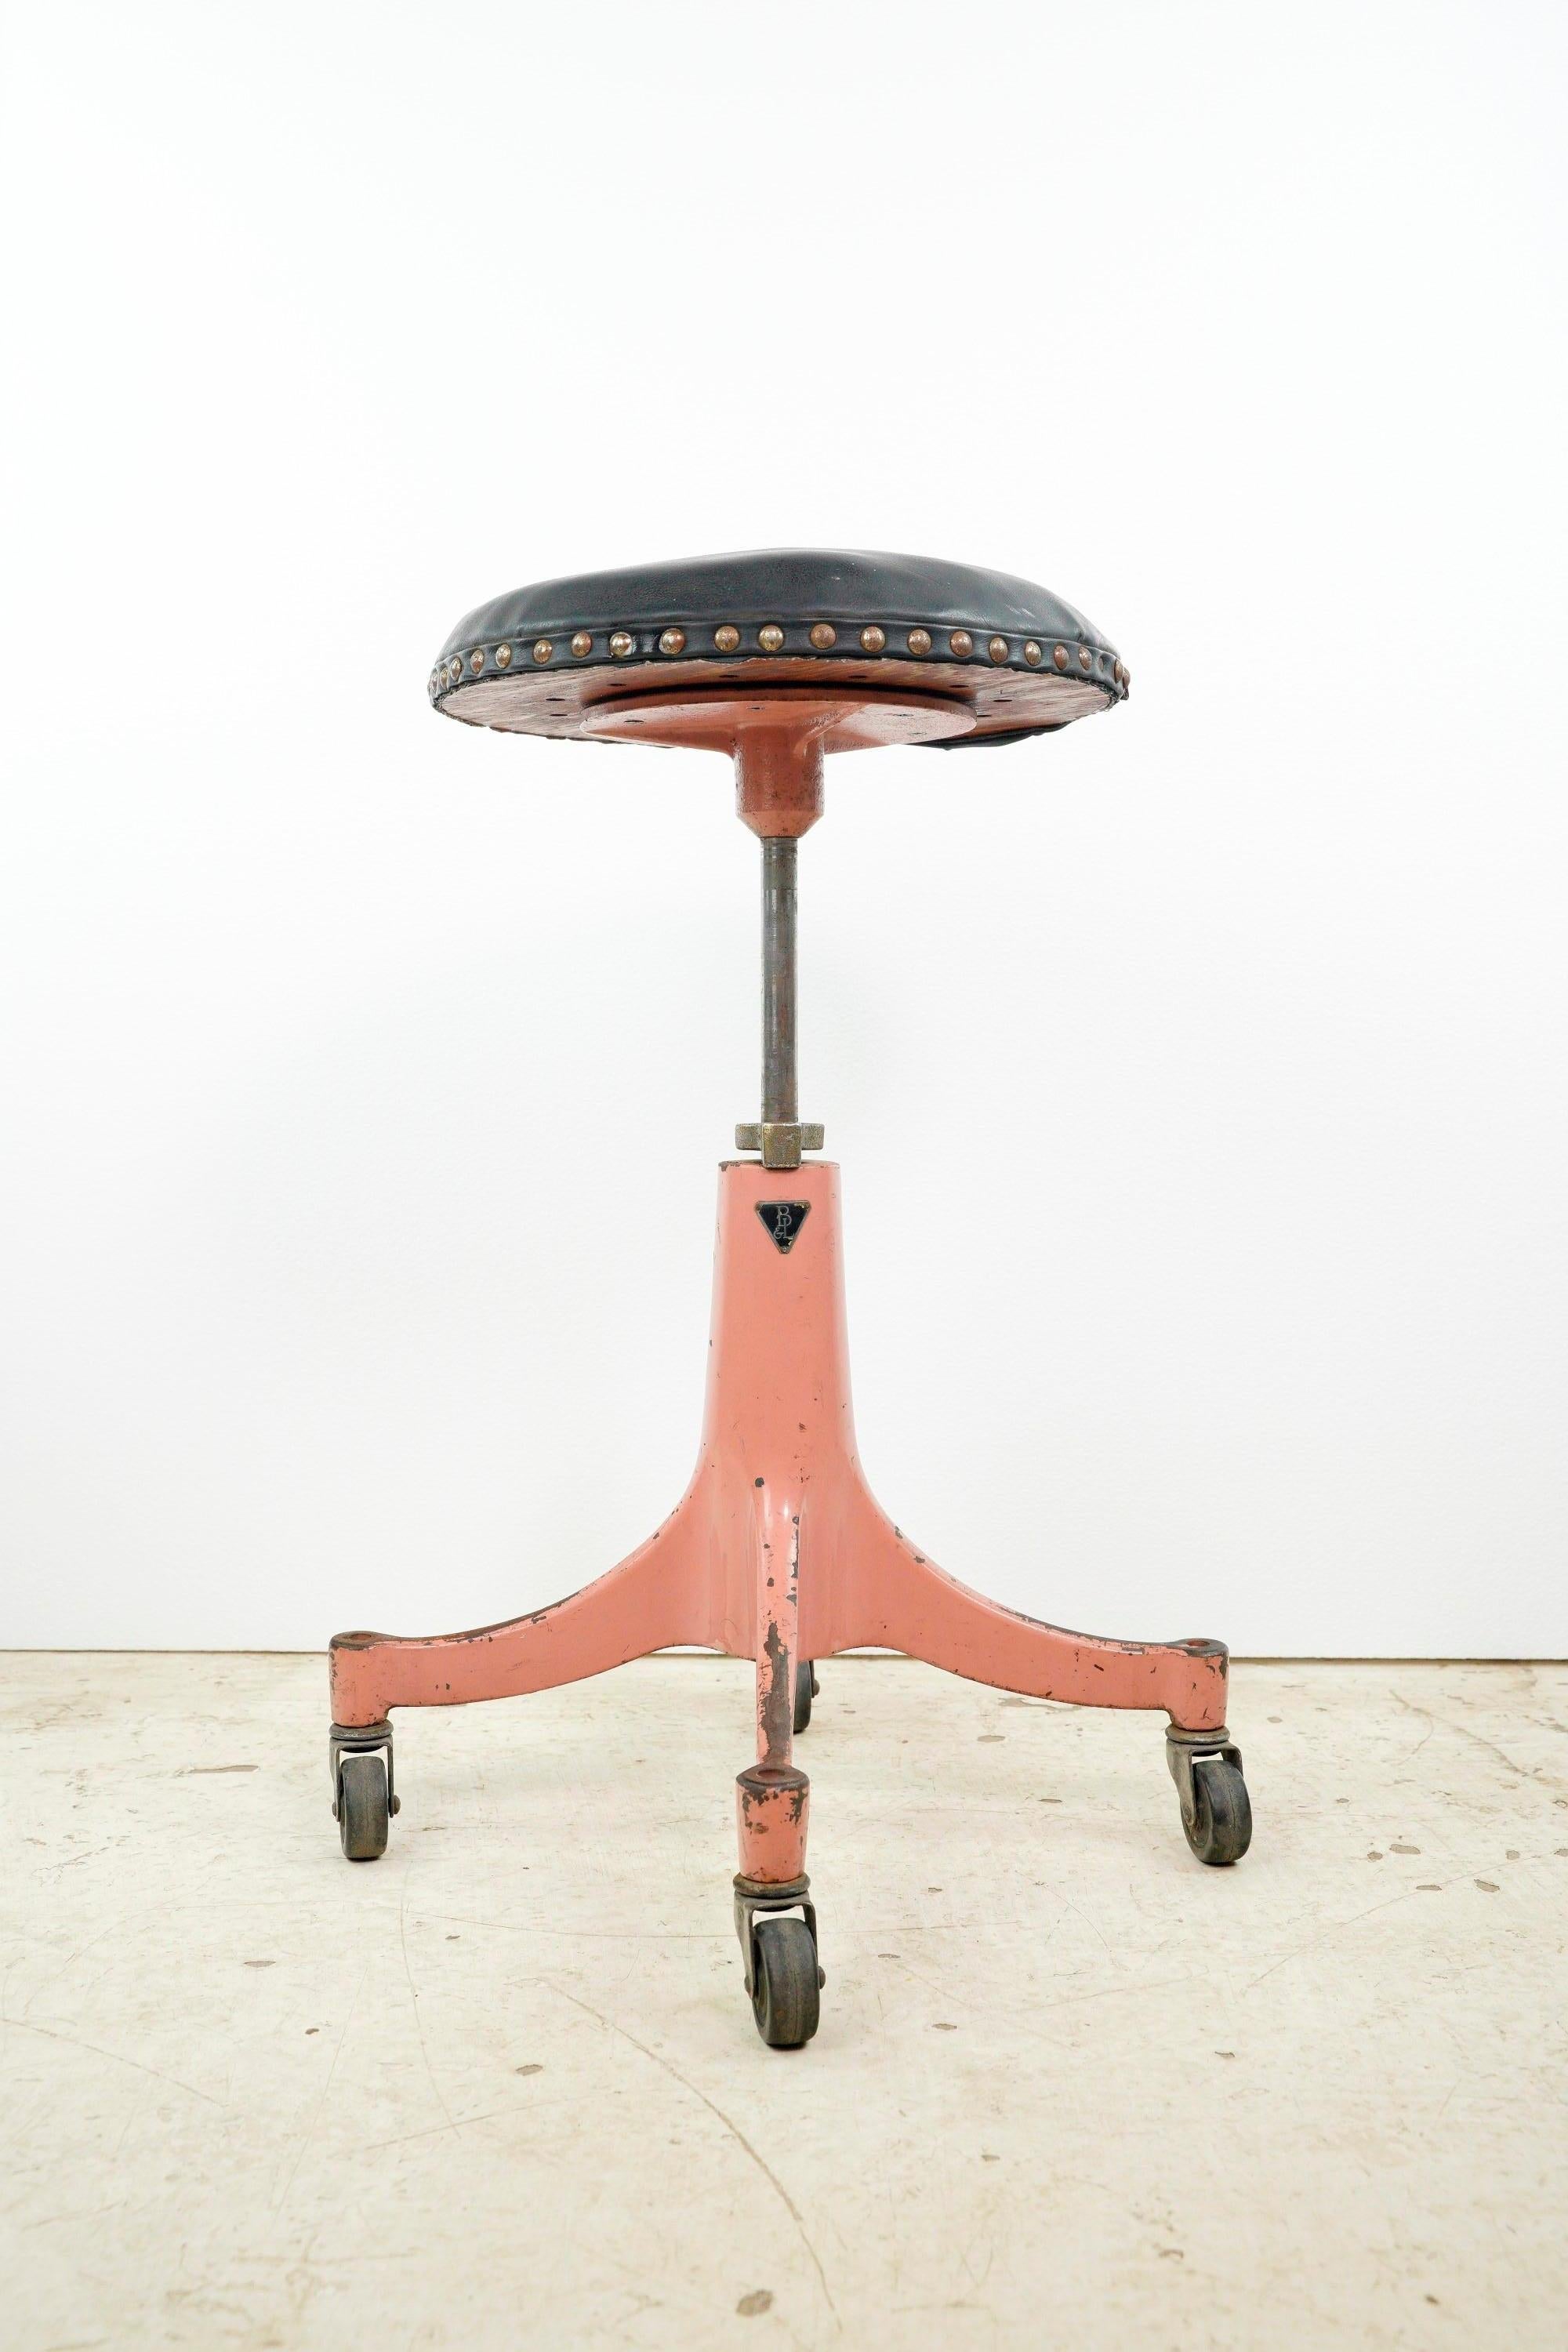 Antique pink cast iron base adjustable black leather stool combines elegance and functionality. With its charming design and adjustable height, it offers a stylish seating option for various spaces with a touch of vintage flair. This is in fair